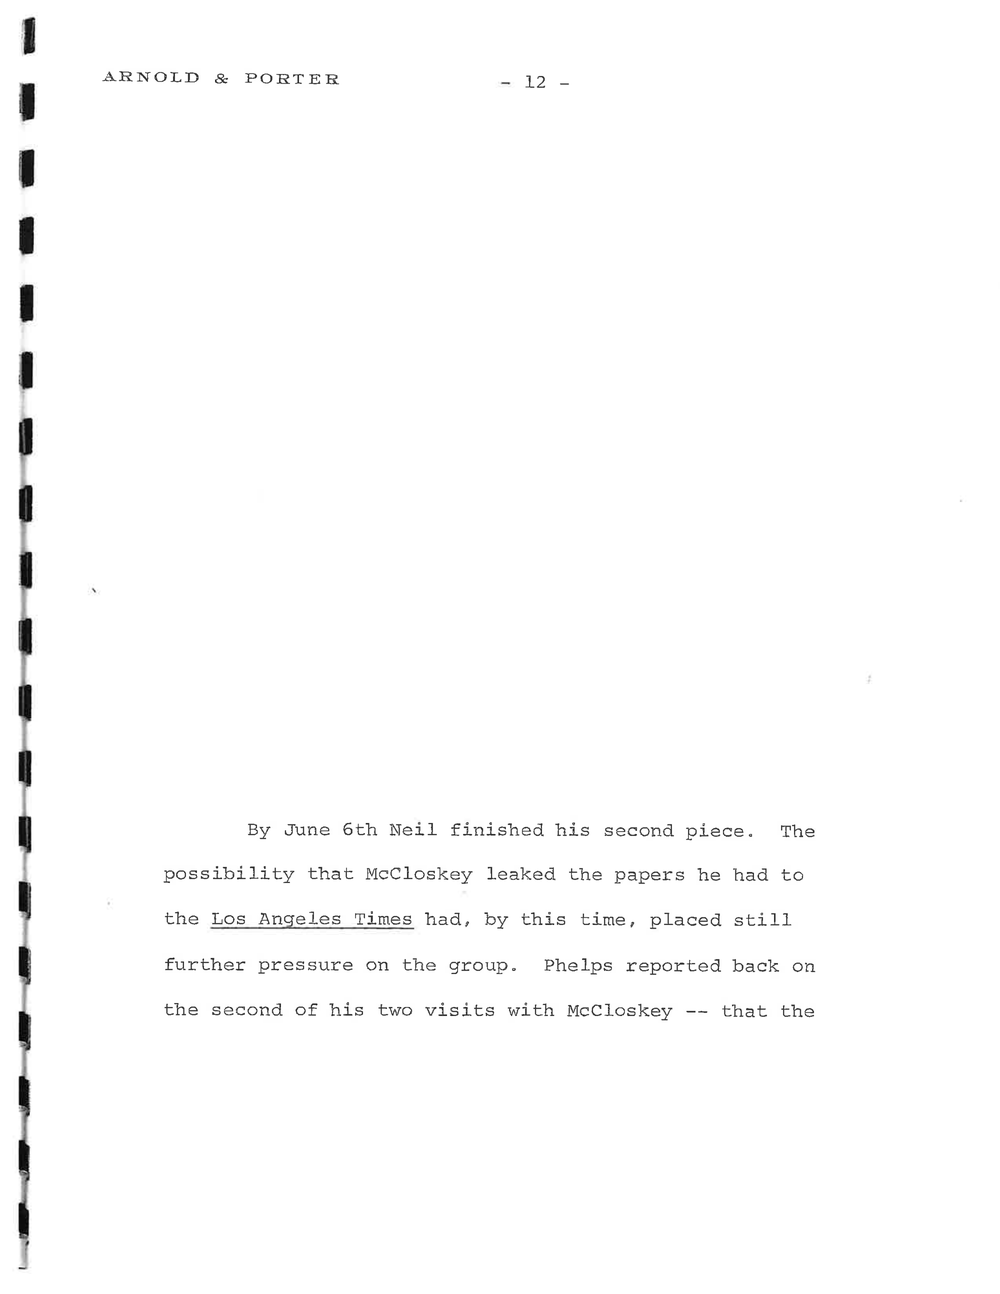 Page 12 from Rogovin Sheehan memo